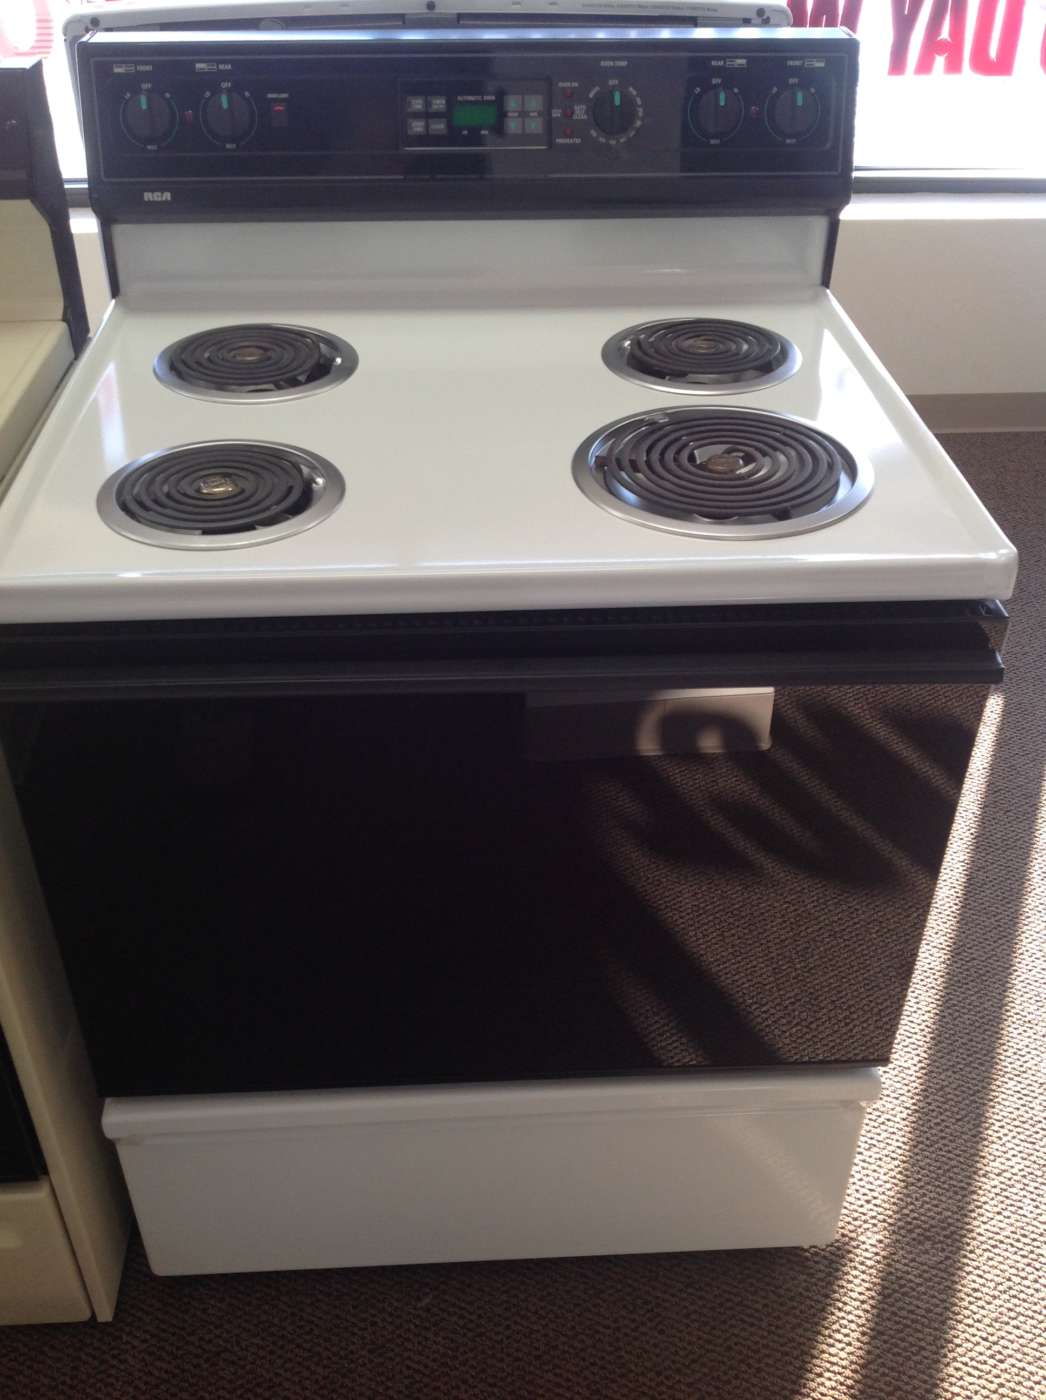 Used RCA (by G/E) Self-Clean Electric Range – White